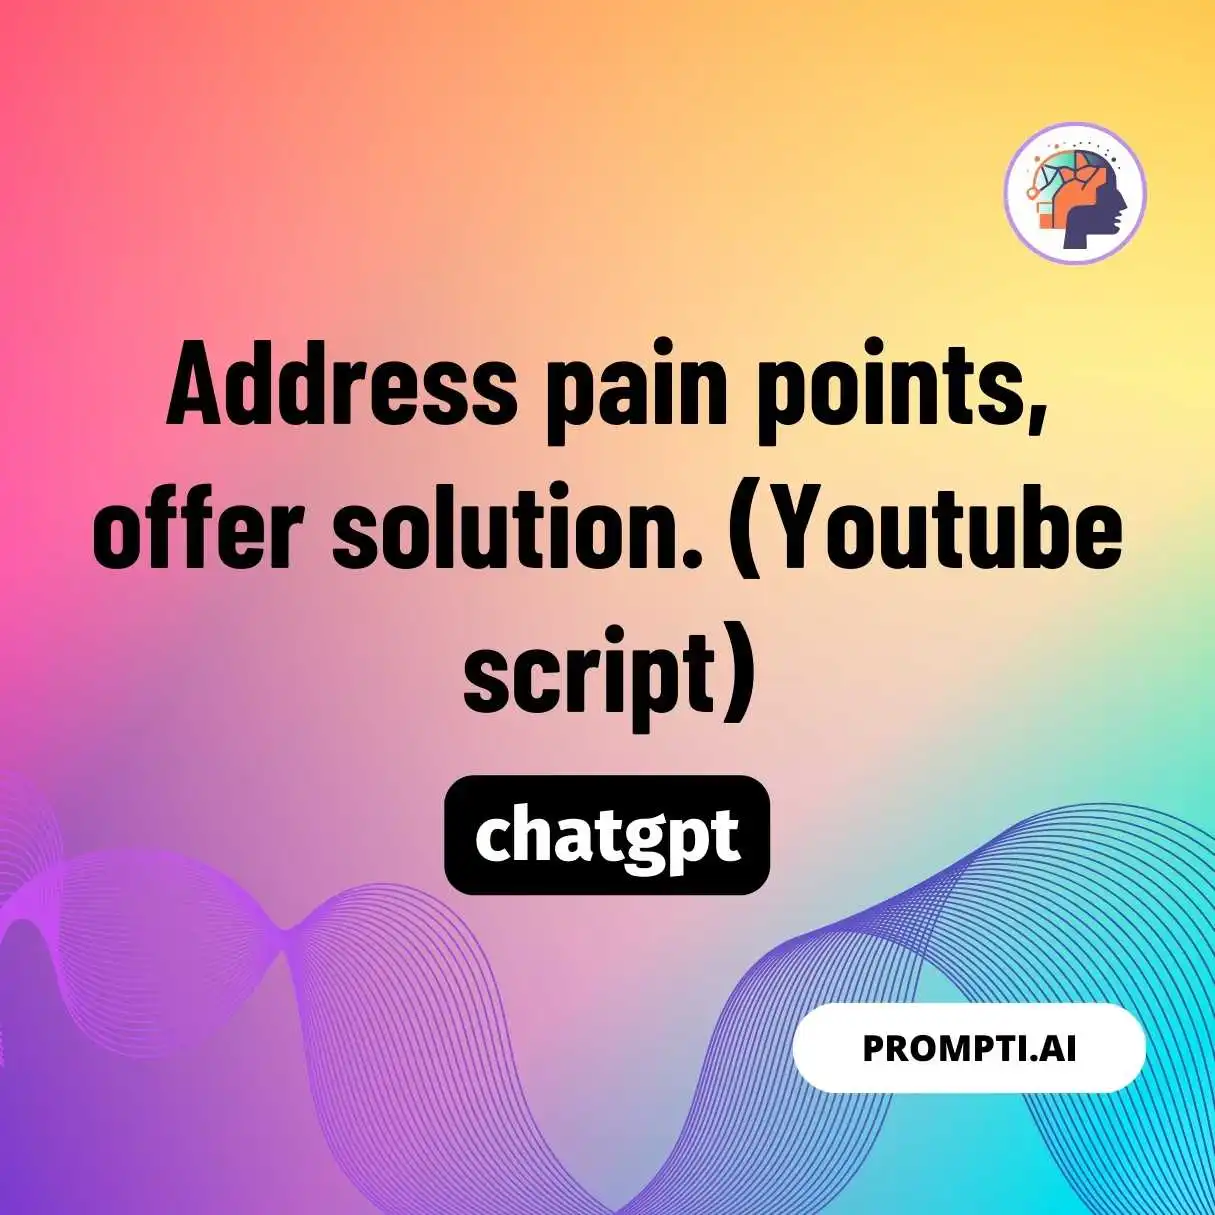 Address pain points, offer solution. (Youtube script)